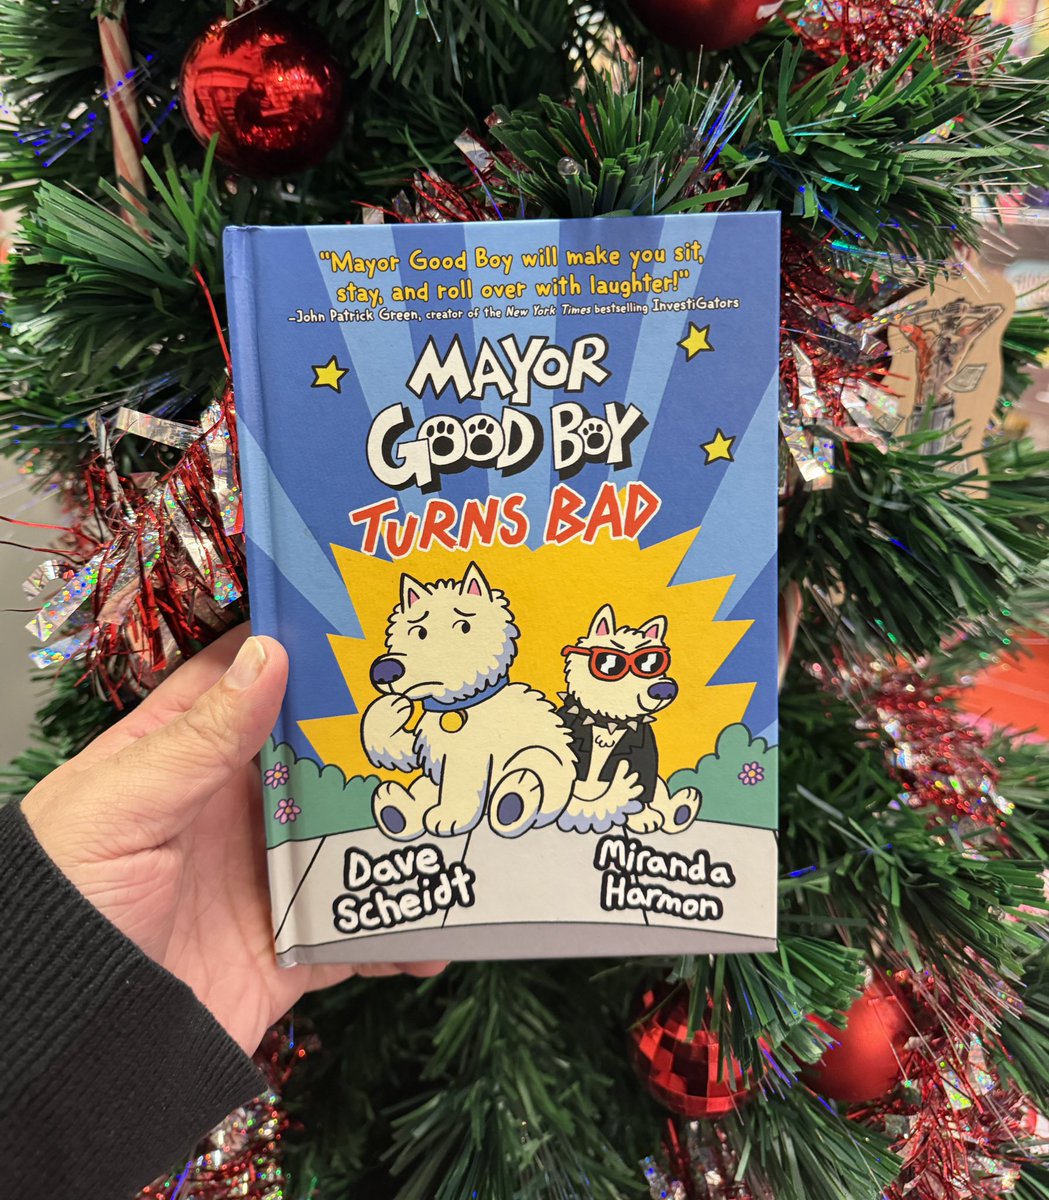 It’s not too late to treat your favorite lil bad boy this holiday season with MAYOR GOOD BOY TURNS BAD by @MirandaMHarmon @snailpaw and me! #mayorgoodboy #kidlit #books #badboy